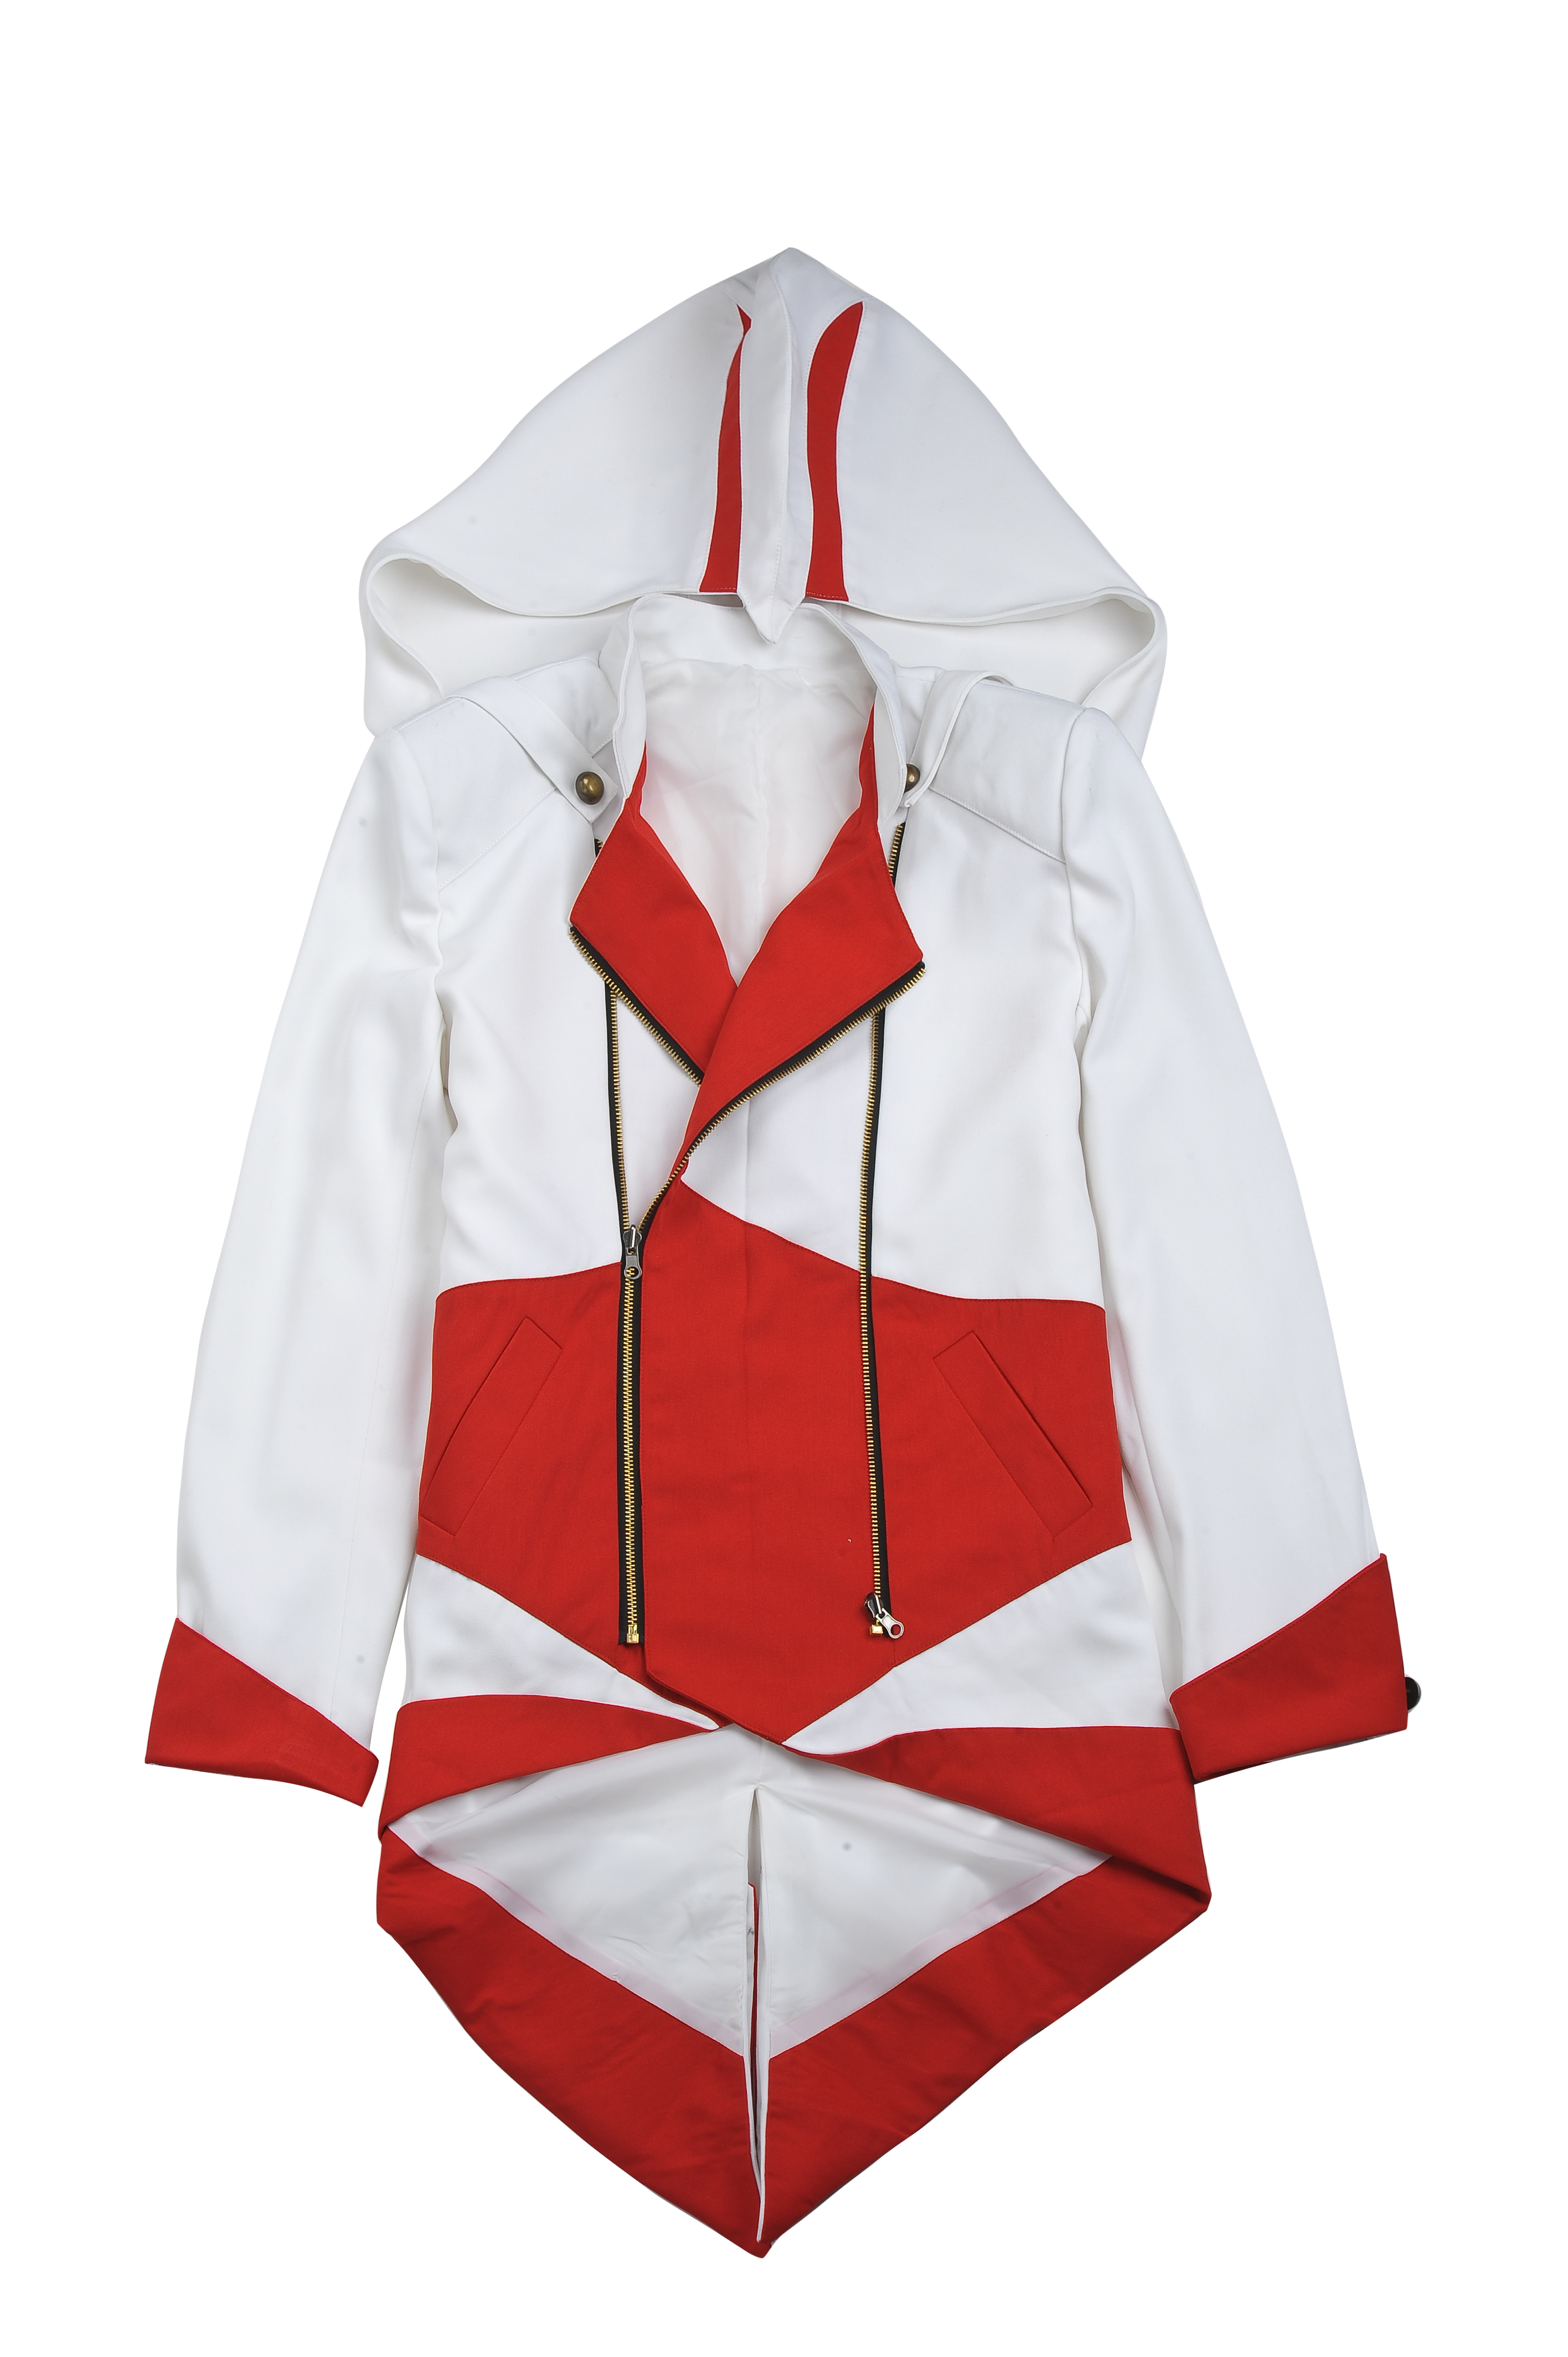 Assassins Creed 3 Connor Kenway Coat Jacket Hoodie White Red